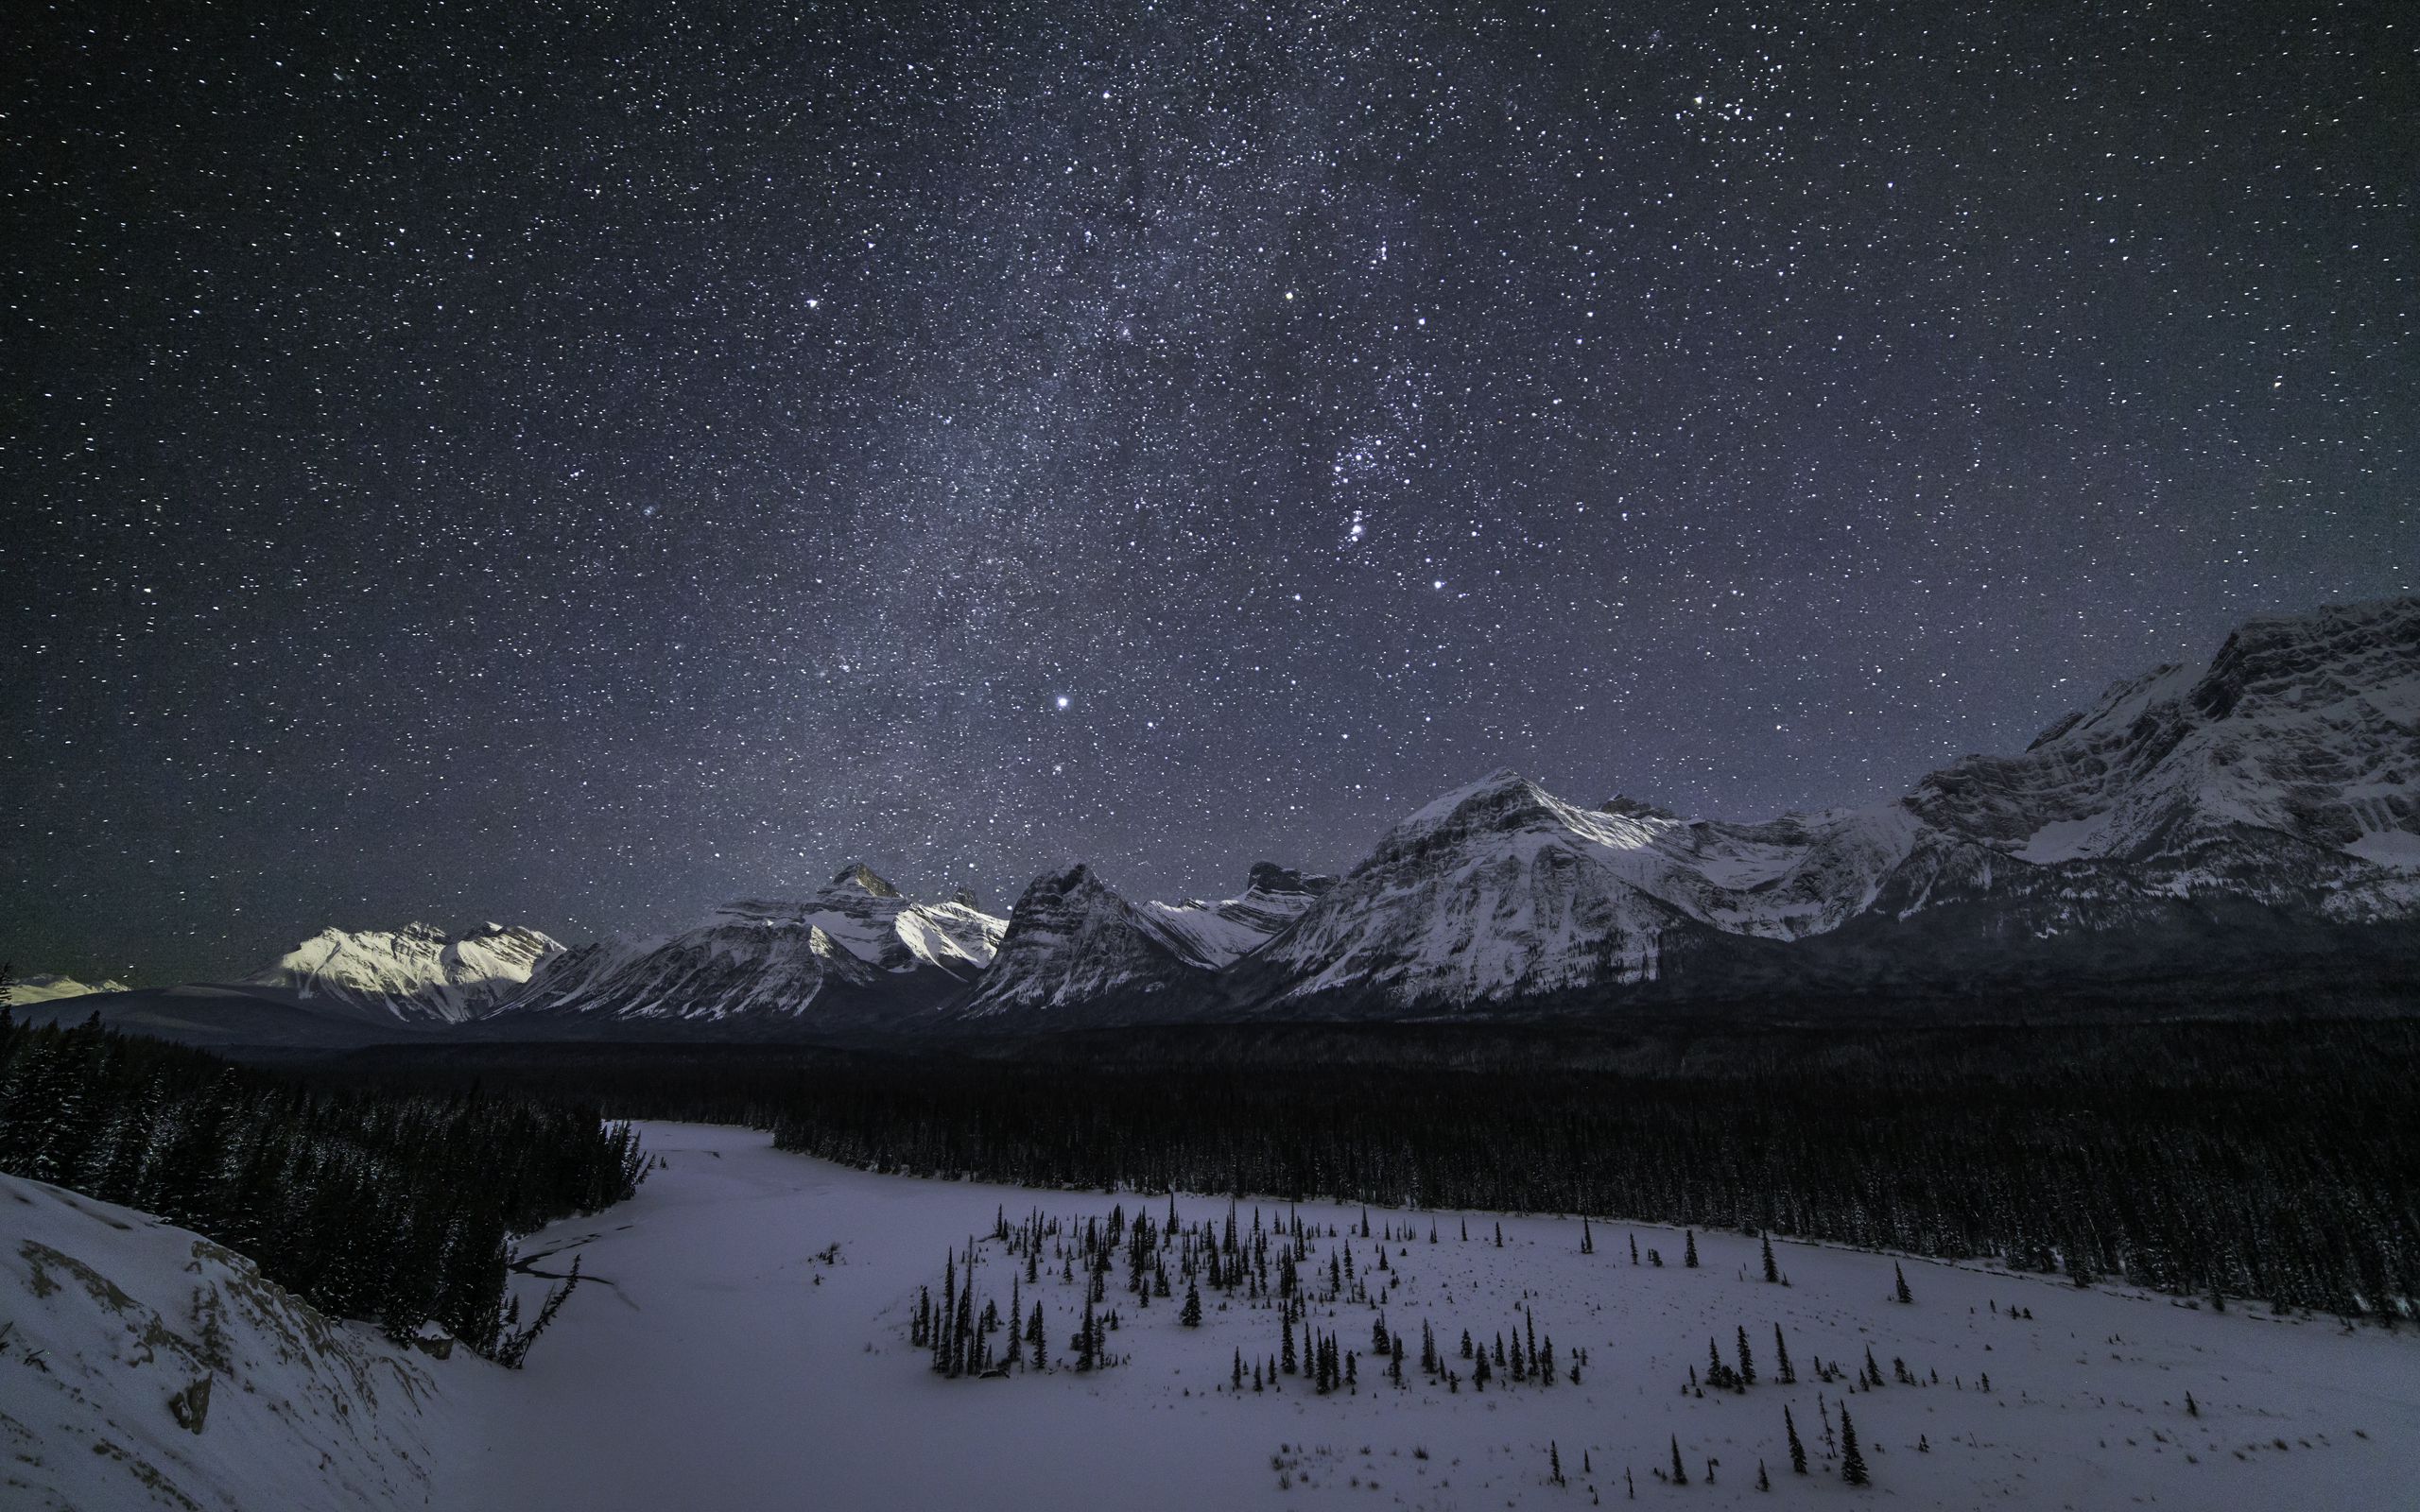 Download wallpaper 2560x1600 mountains, stars, night, snow, winter widescreen 16:10 HD background